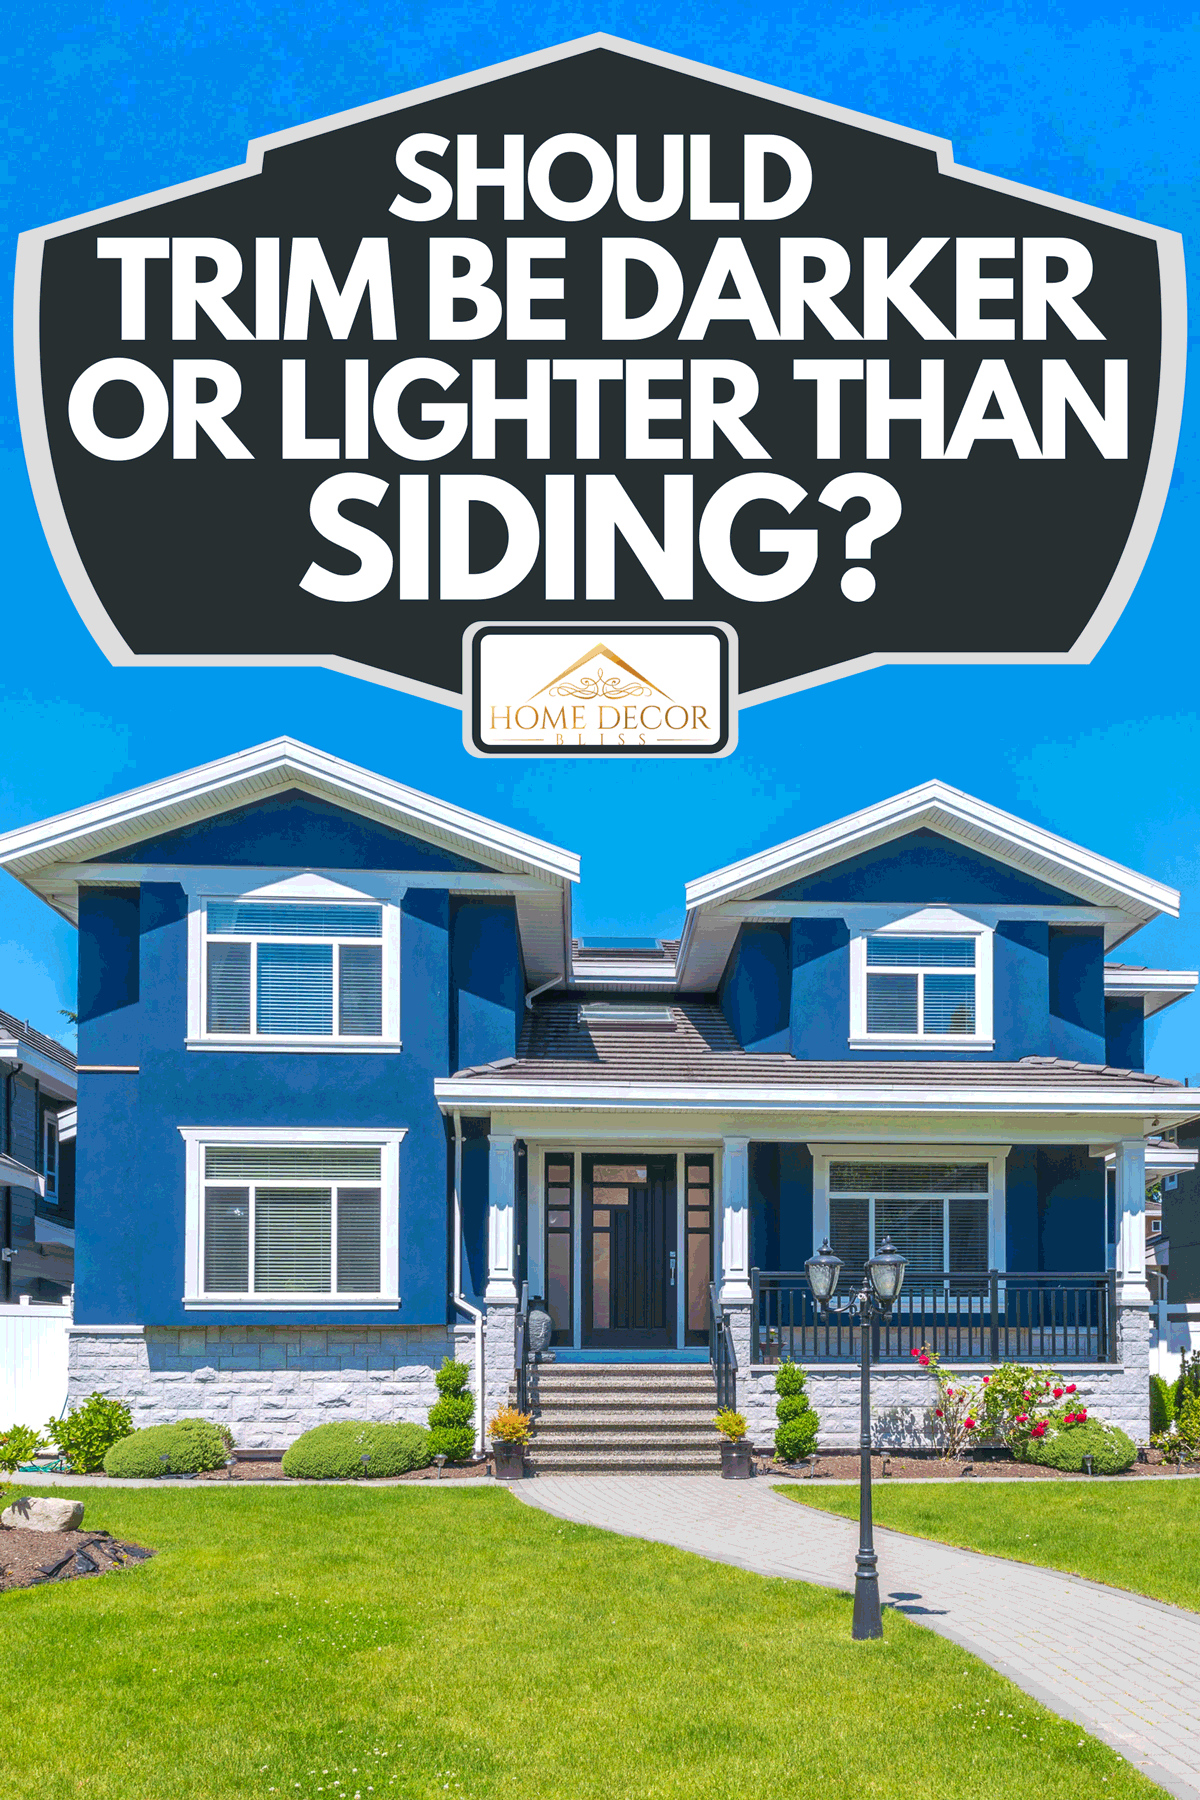 A big custom made luxury house with nicely trimmed and landscaped front yard, Should Trim Be Darker Or Lighter Than Siding?